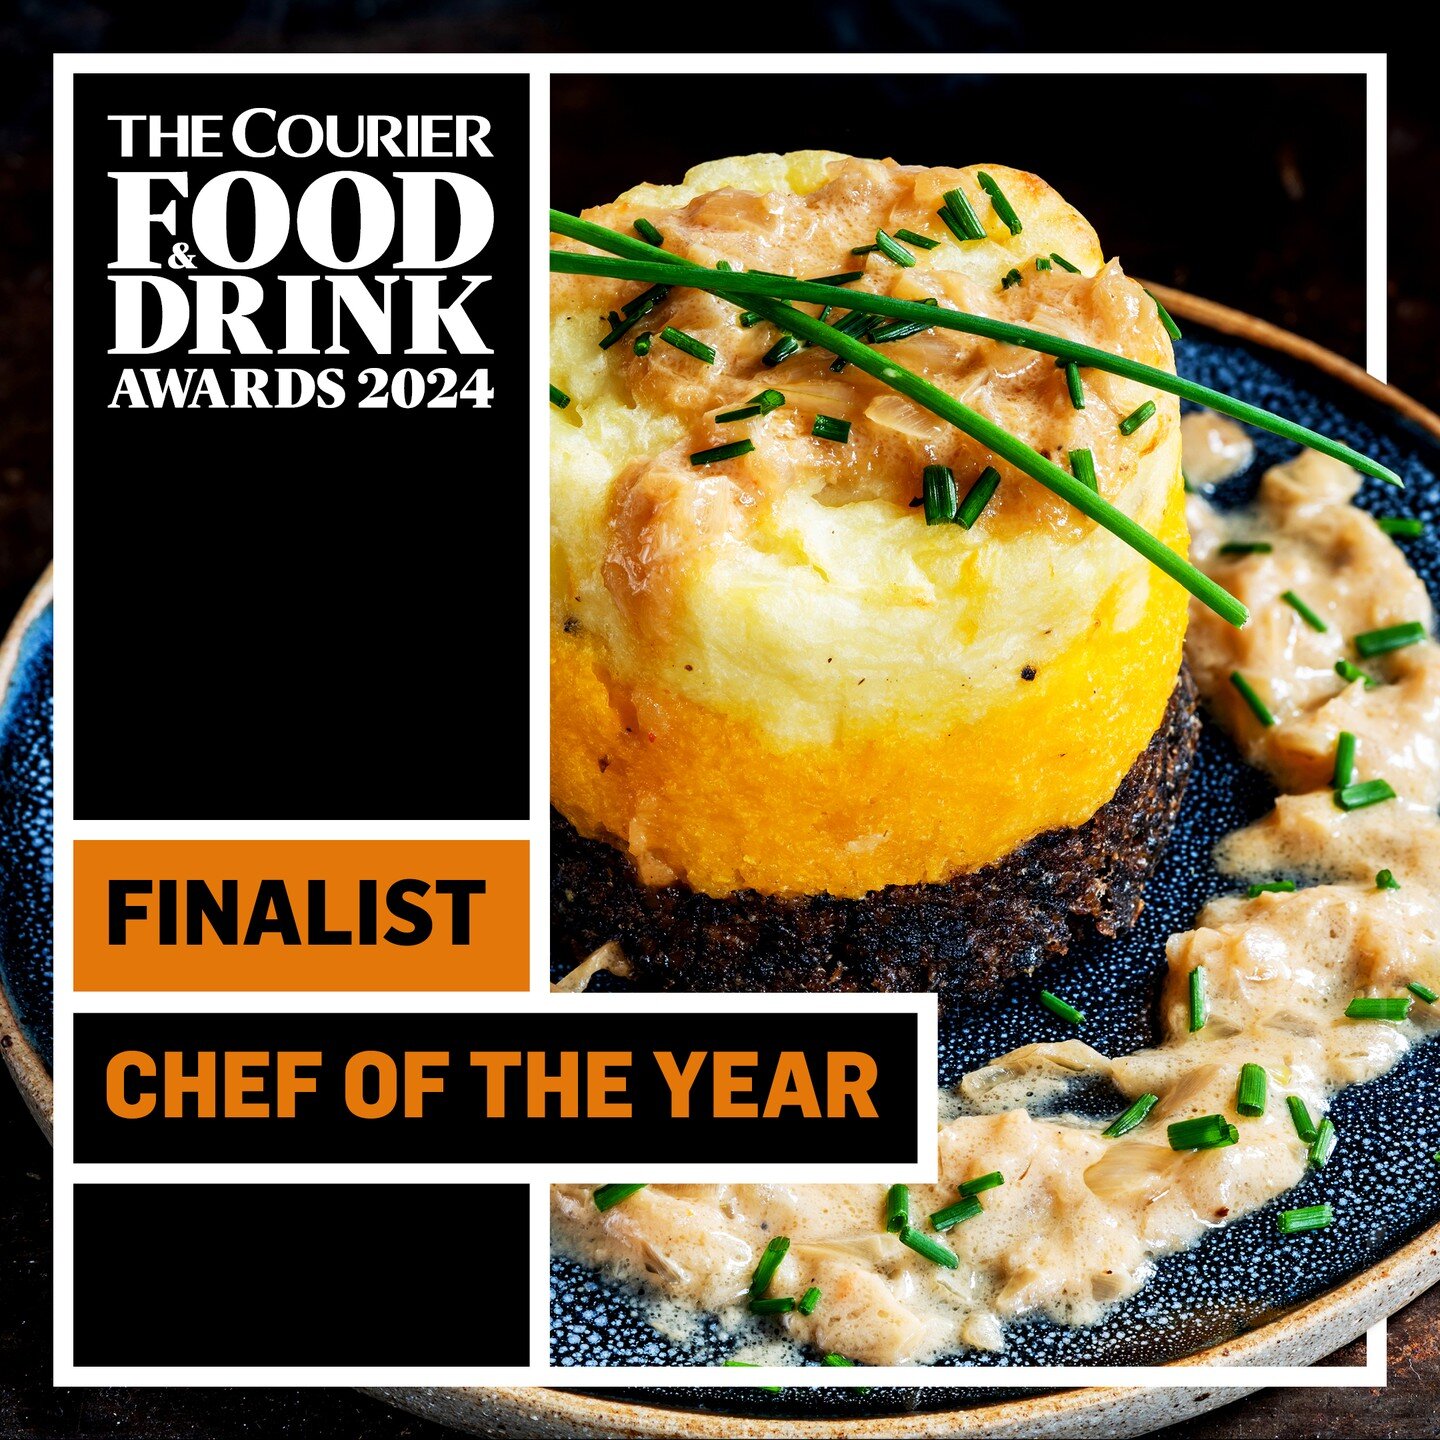 🎉 Today, we're off to the Courier Food and Drink Awards! 🤞@chef_andy_spence

🏆 As a result, The Boar's Head will be closed for the day. 

Thank you for your support, and we'll share our experiences with you soon!

#courierfoodanddrinkawards #resta